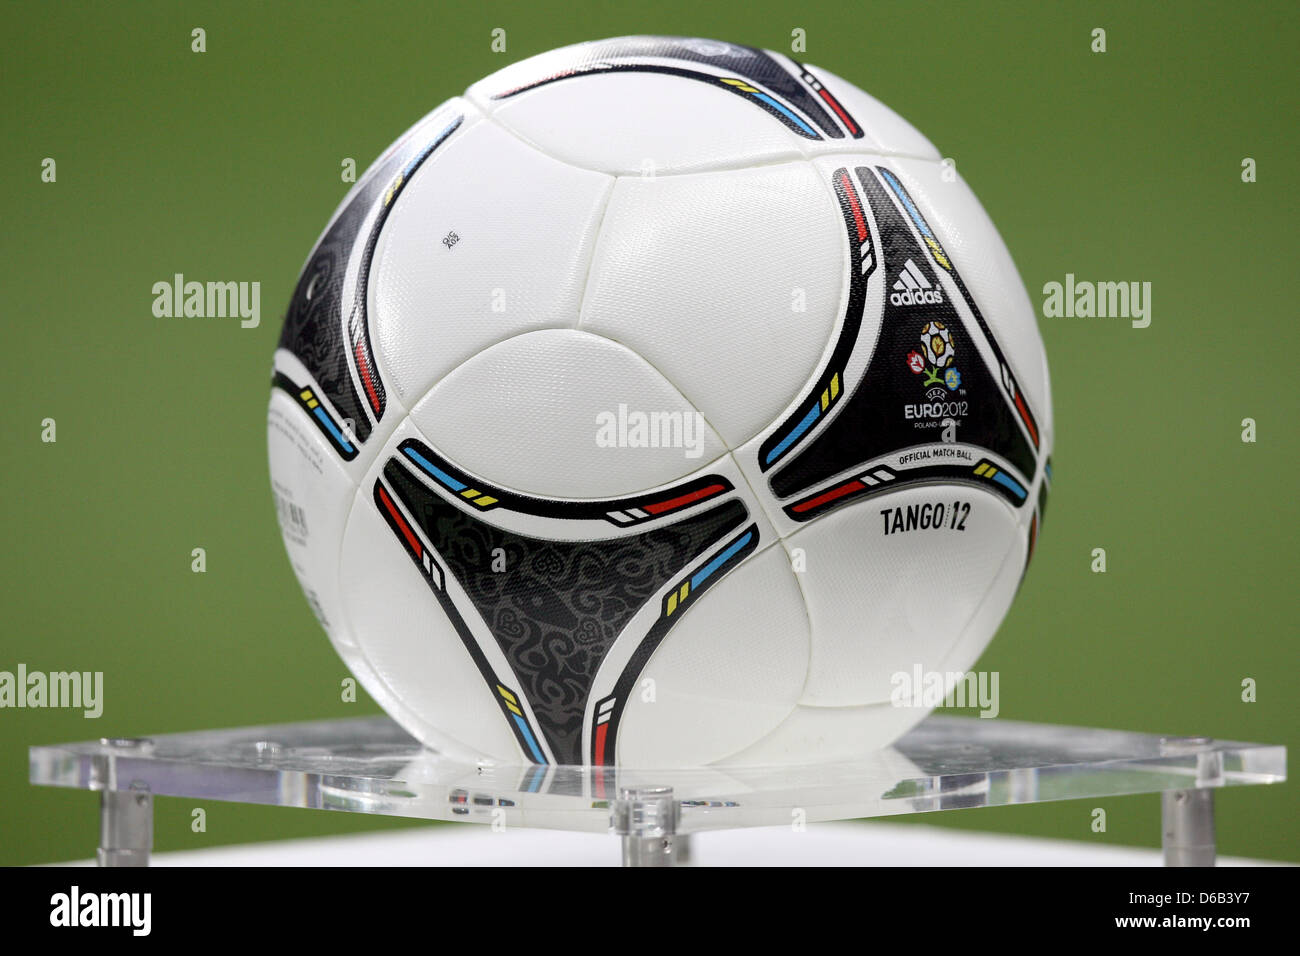 Involucrado prioridad pompa The soccer ball 'Tango 12' by adidas lies on a pedestal before the  international soccer match between Germany and Argentina at the  Commerzbank-Arena in Frankfurt Main, Germany, 15 August 2012. Photo: Fredrik